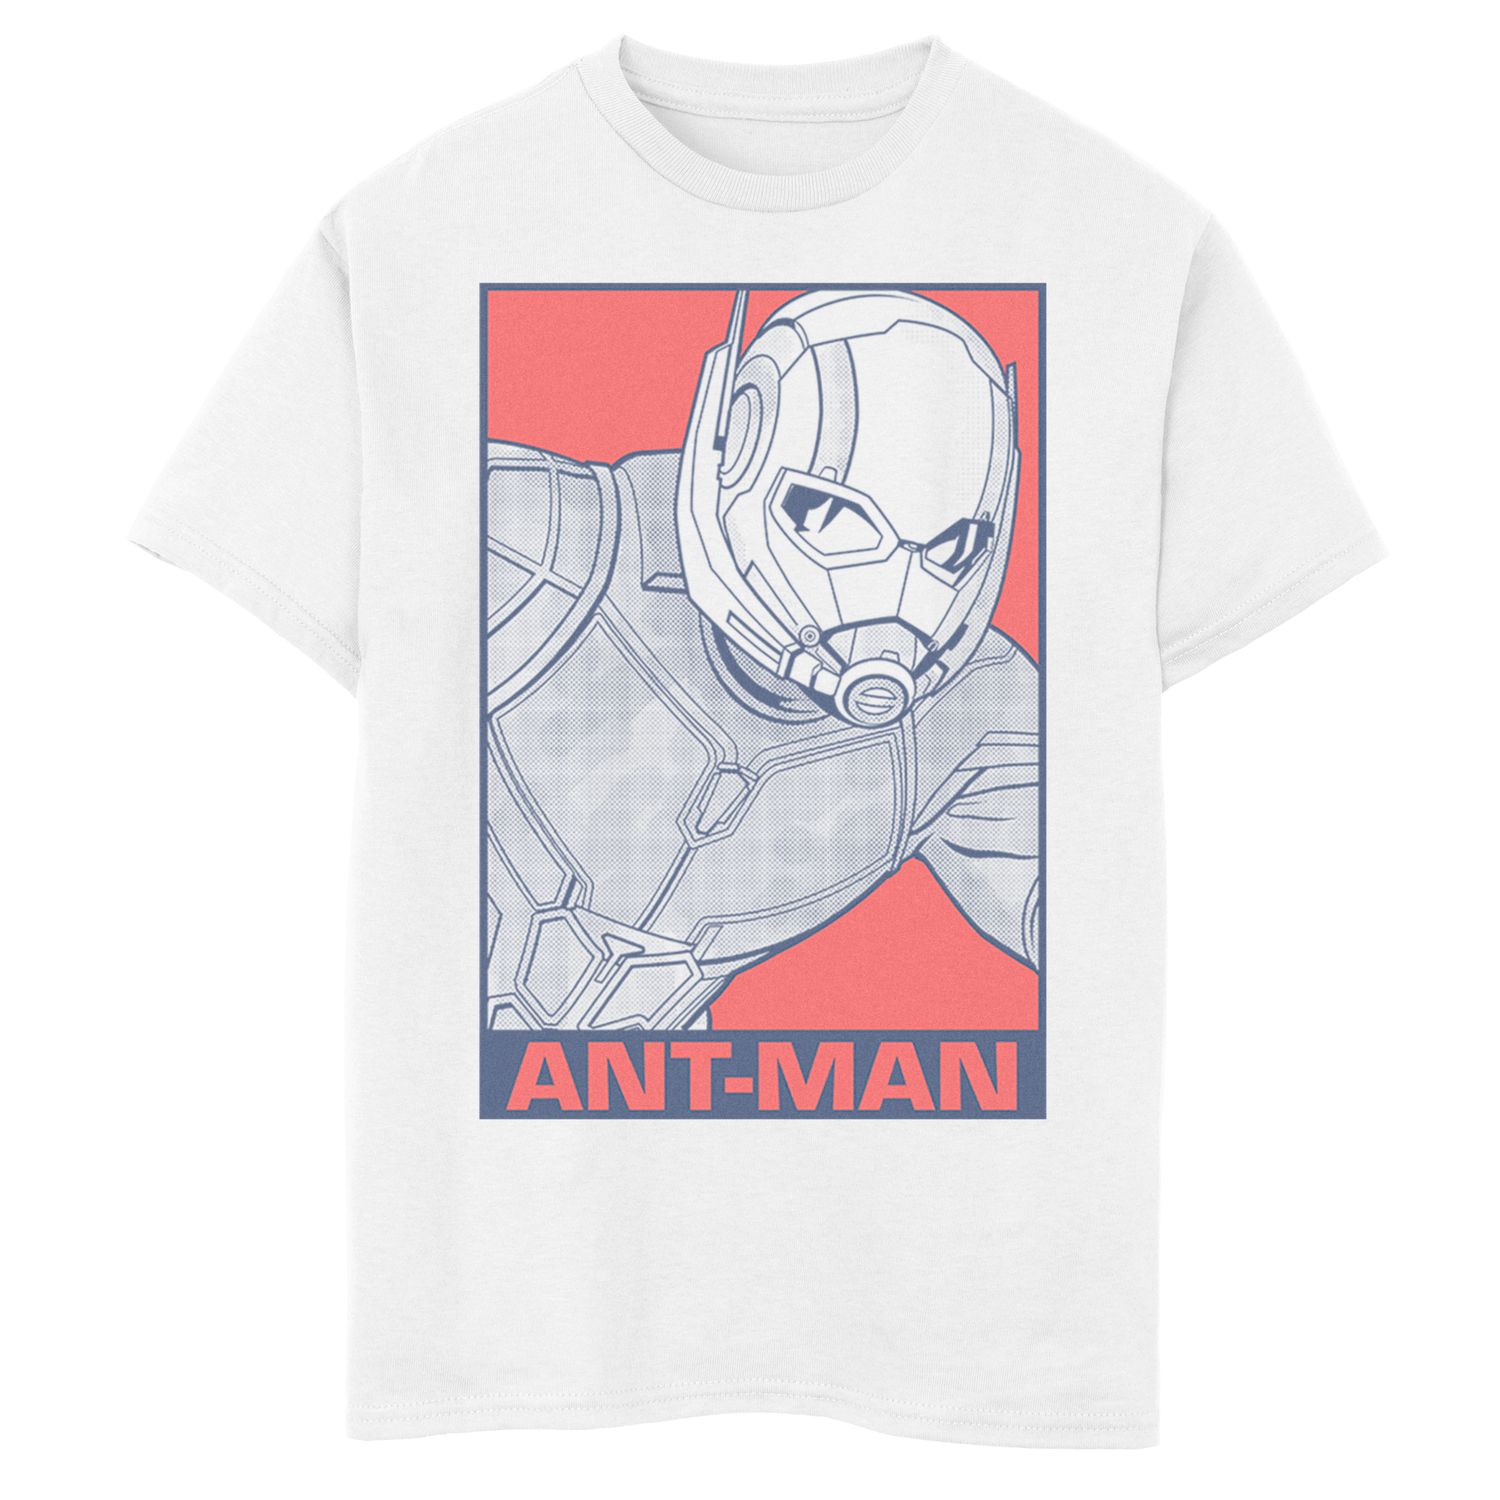 Ant Man T Shirt Roblox Buy Clothes Shoes Online - black panther shirt roblox